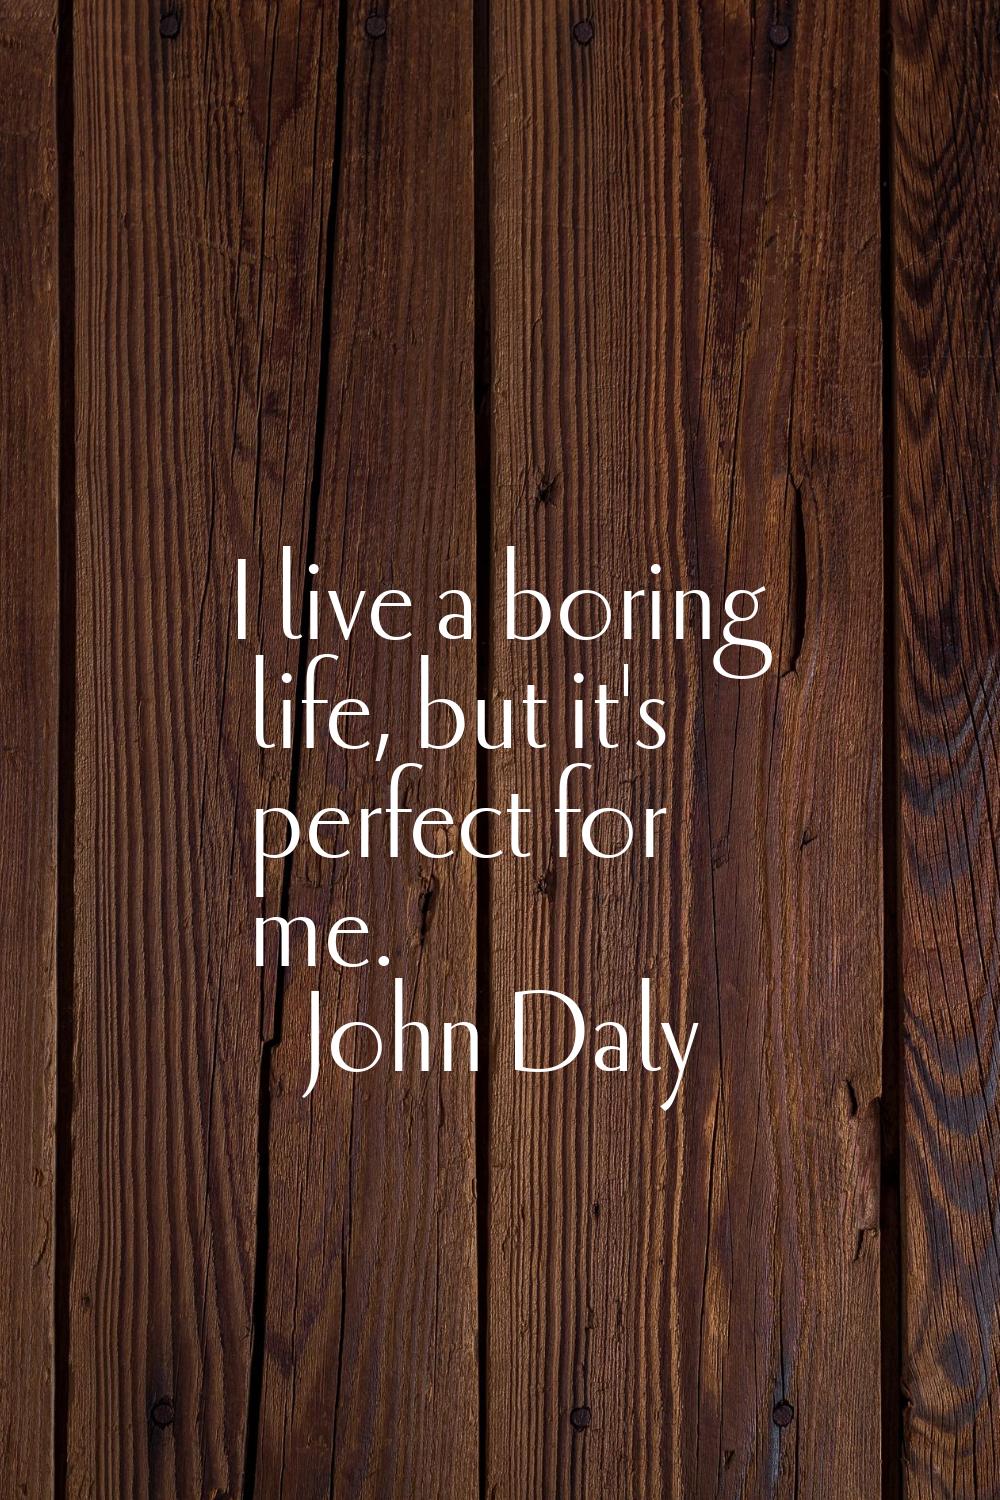 I live a boring life, but it's perfect for me.